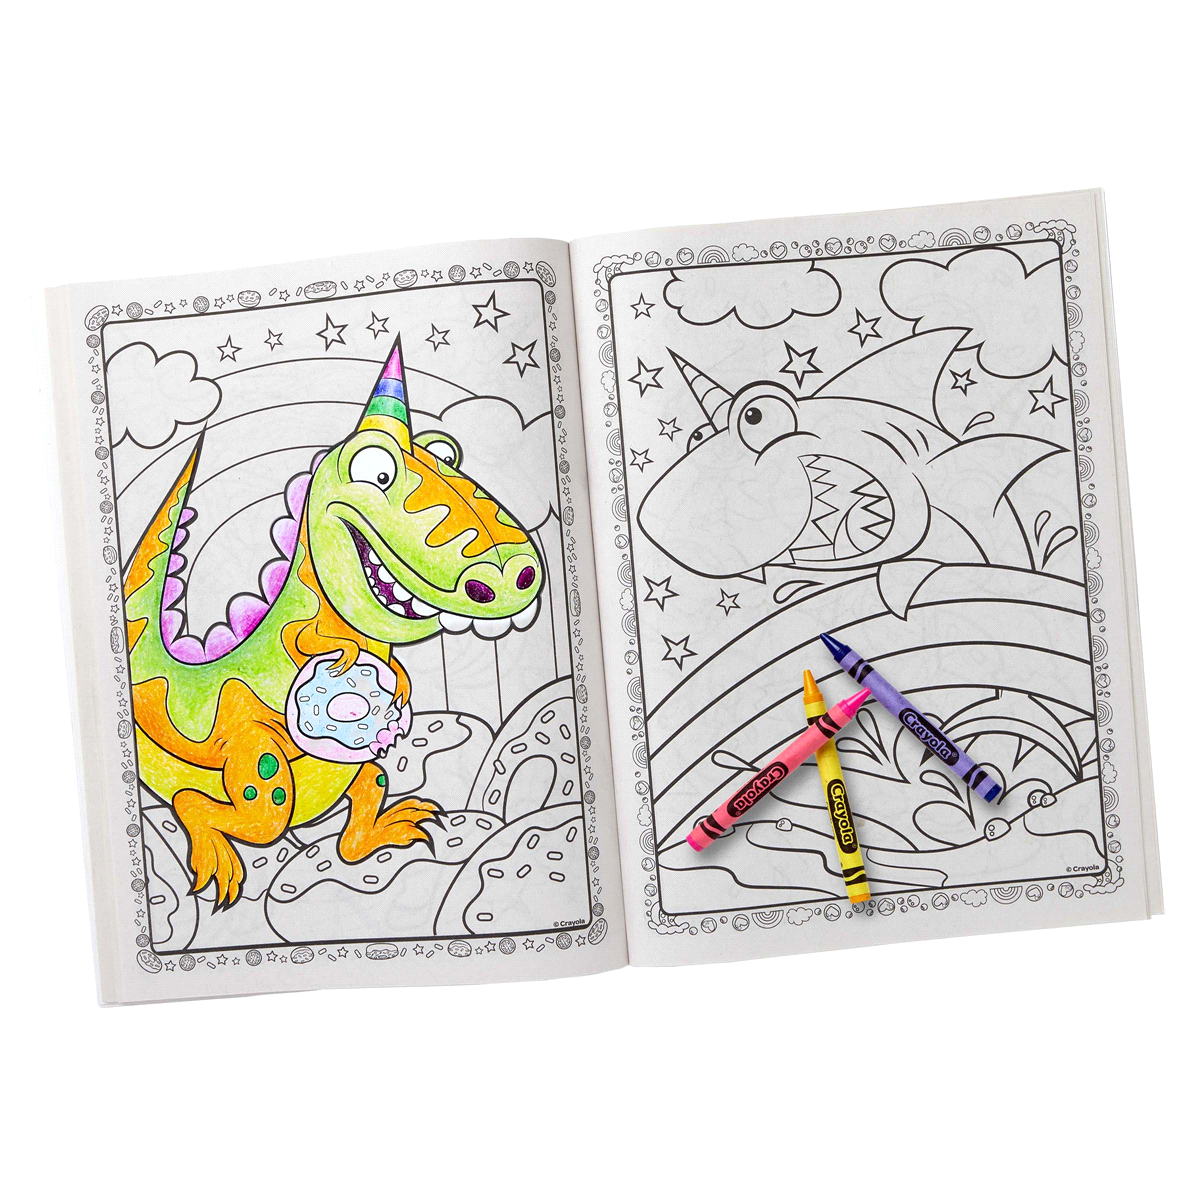 crayola-uni-creatures-coloring-book-64-coloring-pages-featuring